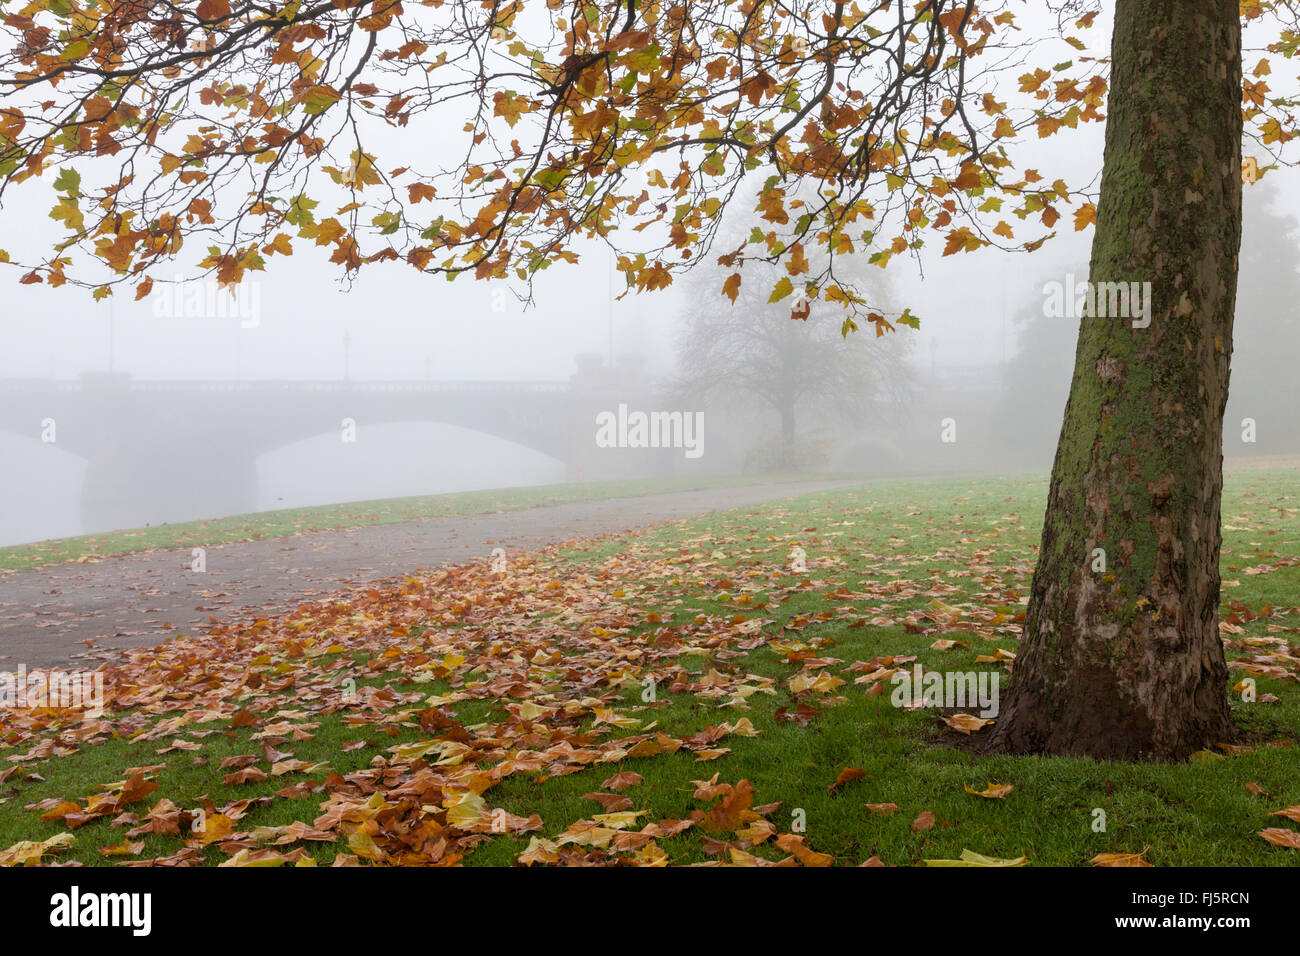 A misty Autumn day with a tree and fallen leaves on grass, Nottinghamshire, England, UK Stock Photo